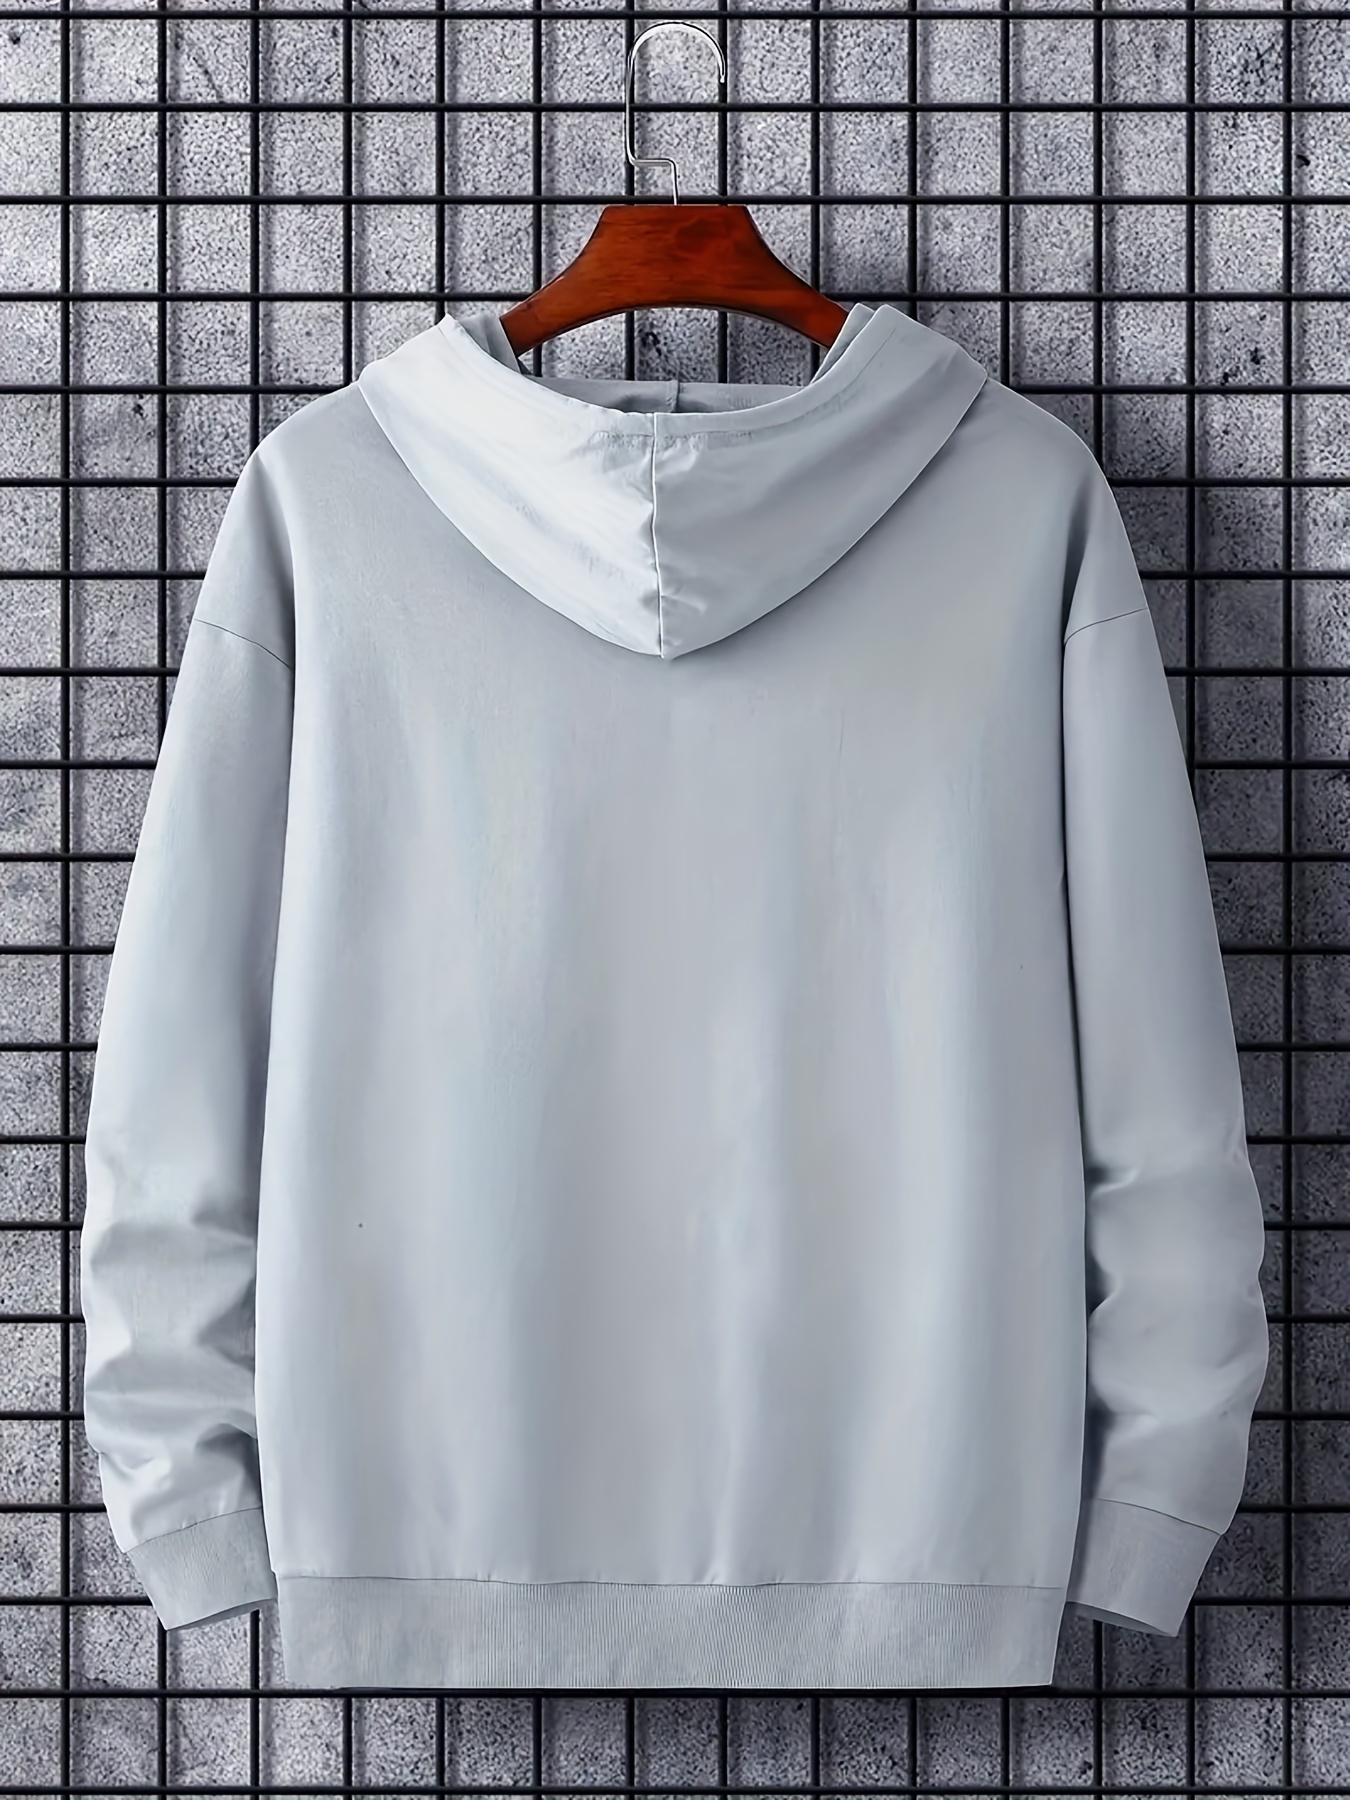  Mens Hoodie Long Sleeve Thermal Face Cover Splice Warm  Lightweight Cotton Sweatshirt : Clothing, Shoes & Jewelry